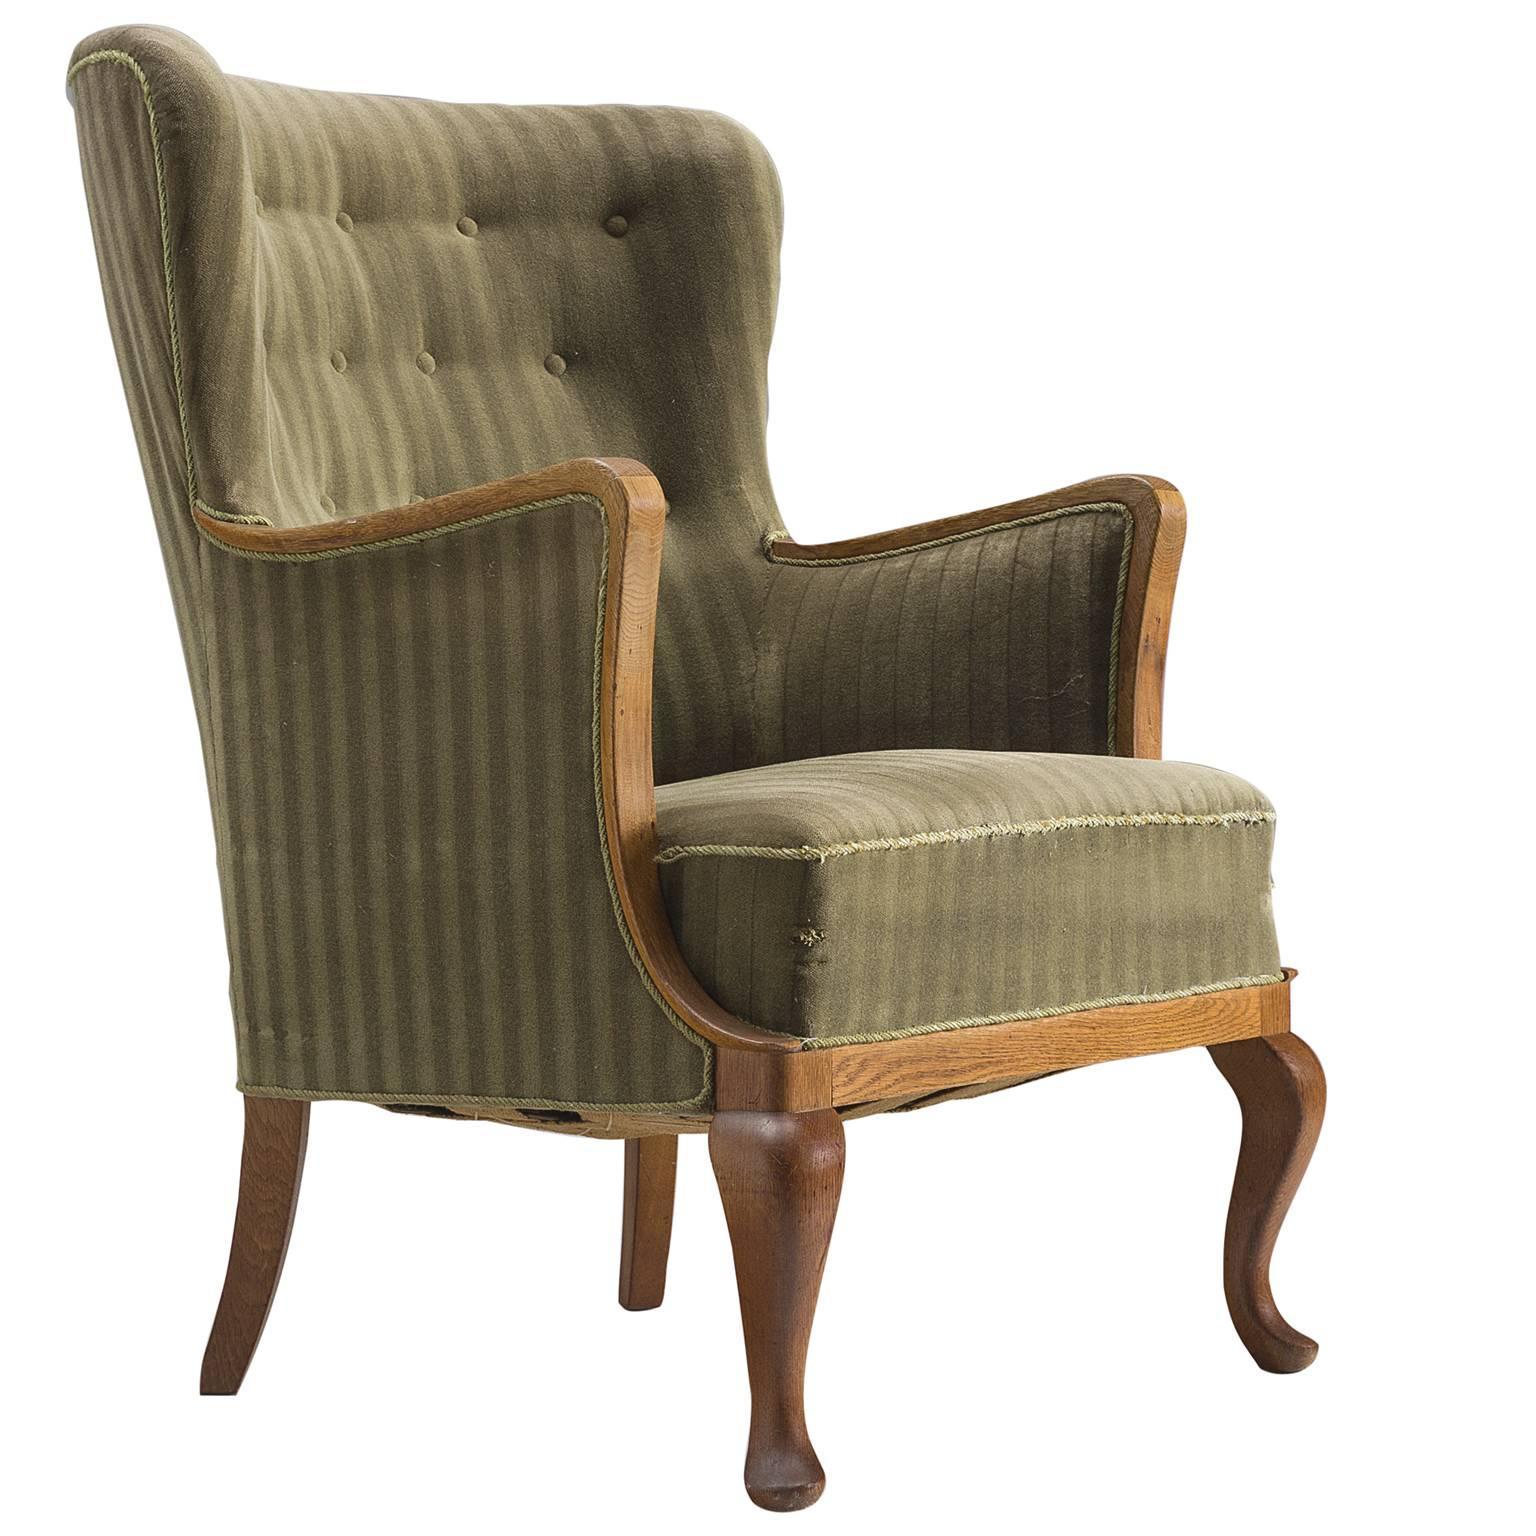 Danish Saber Leg Wingback Chair in Green Upholstery